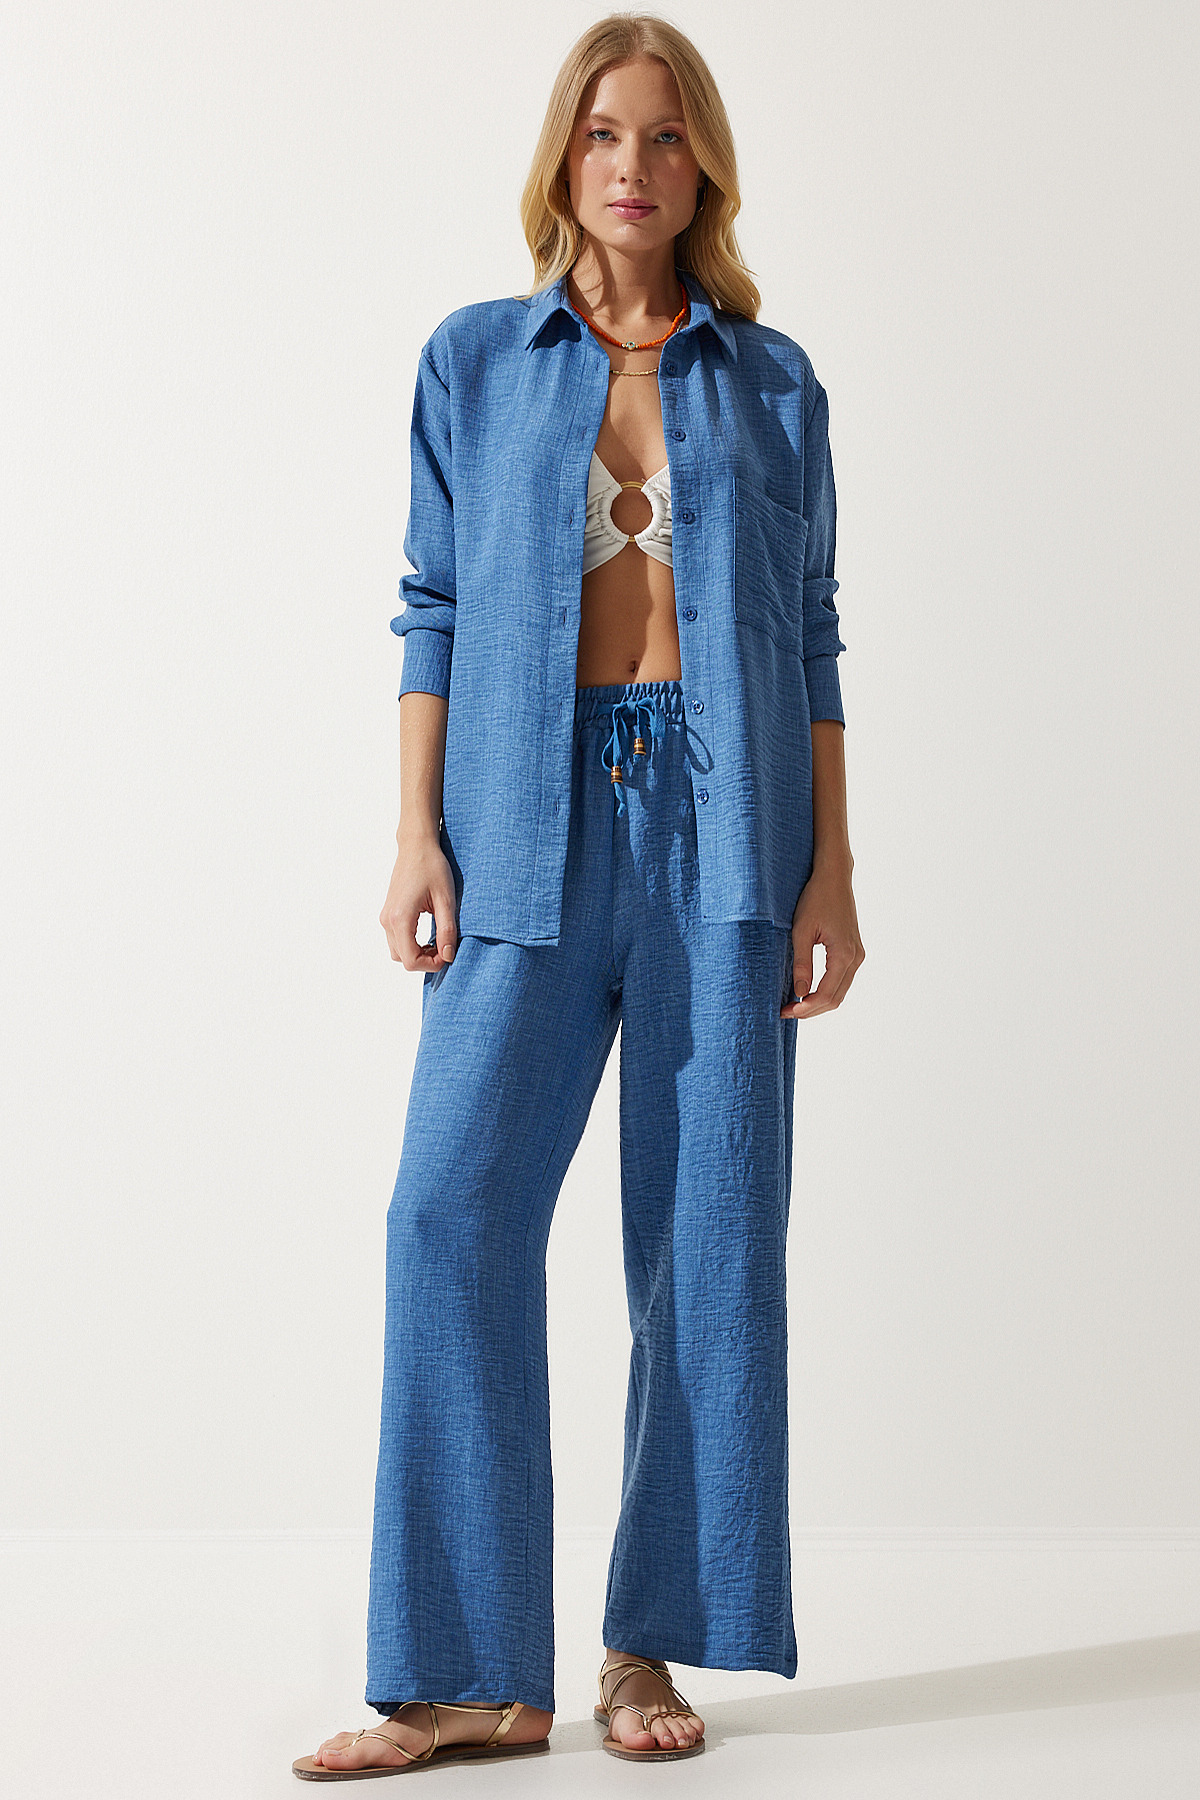 Happiness İstanbul Women's Indigo Blue Oversize Shirt Loose Trousers Suit